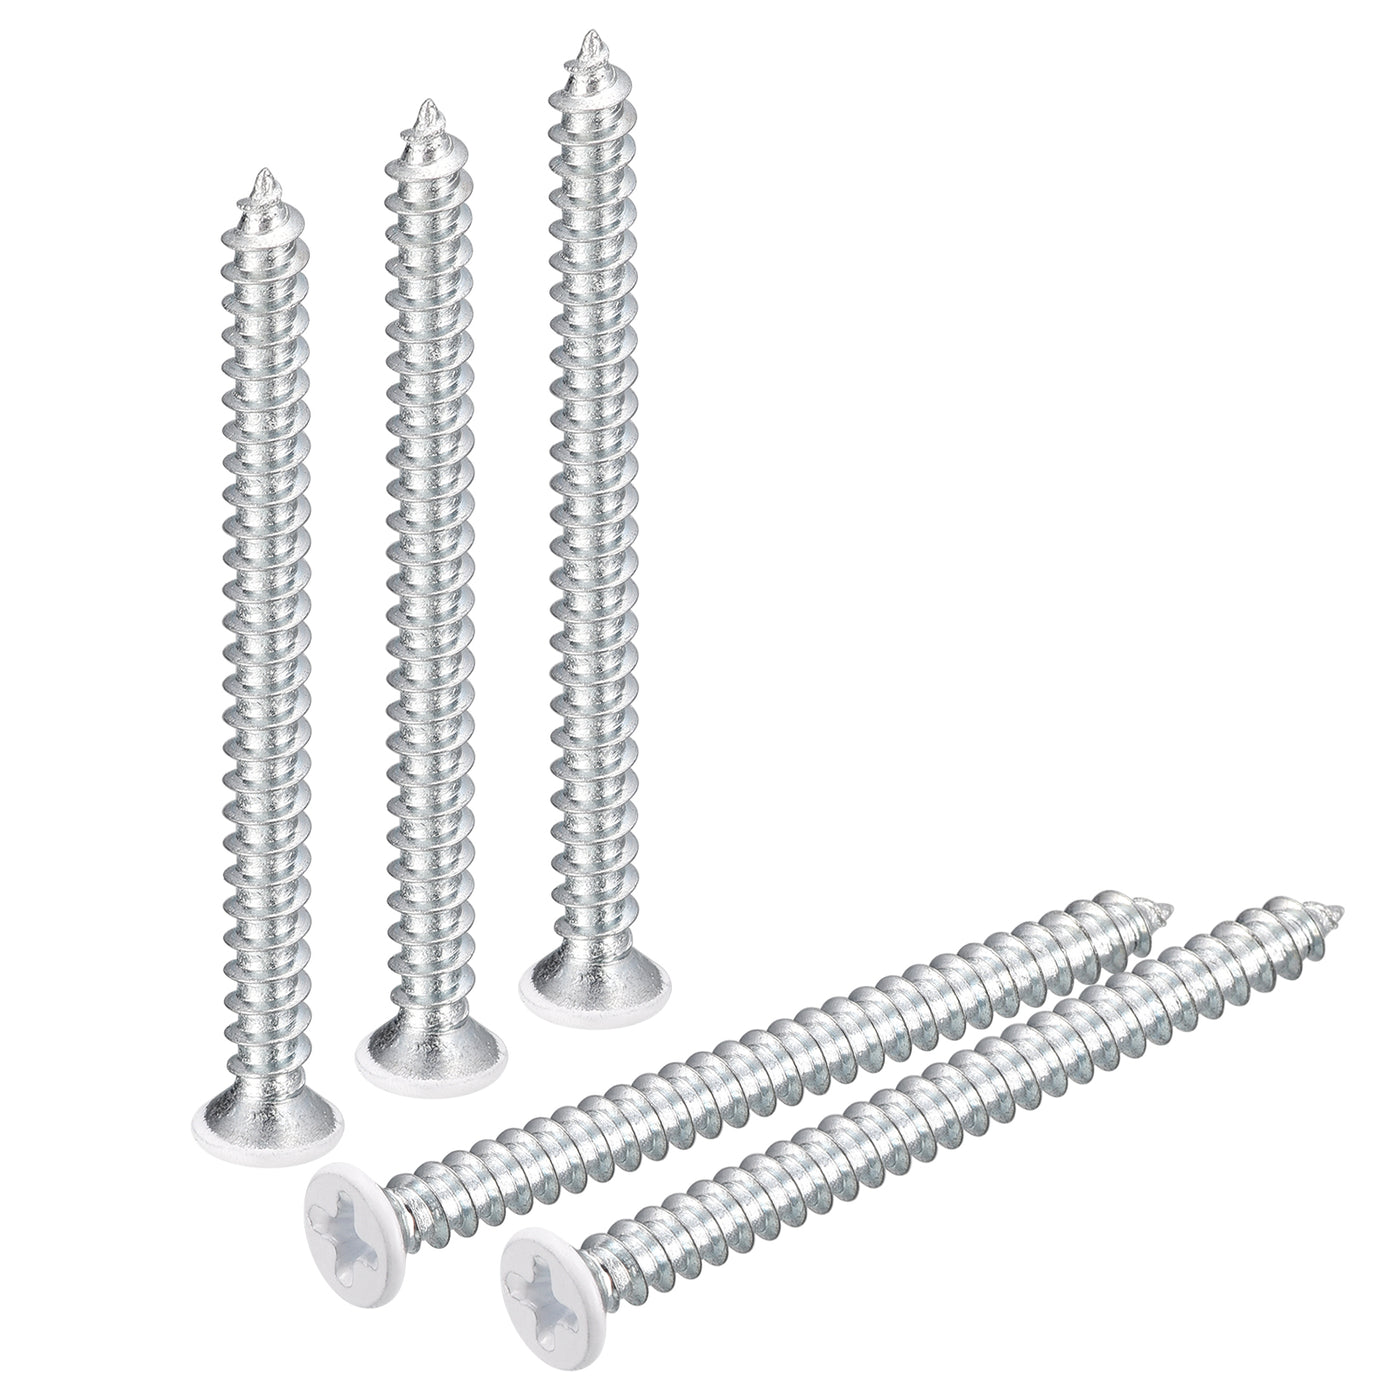 uxcell Uxcell ST4x50mm White Self Tapping Screws, 50pcs Flat Head Phillips Wood Screws